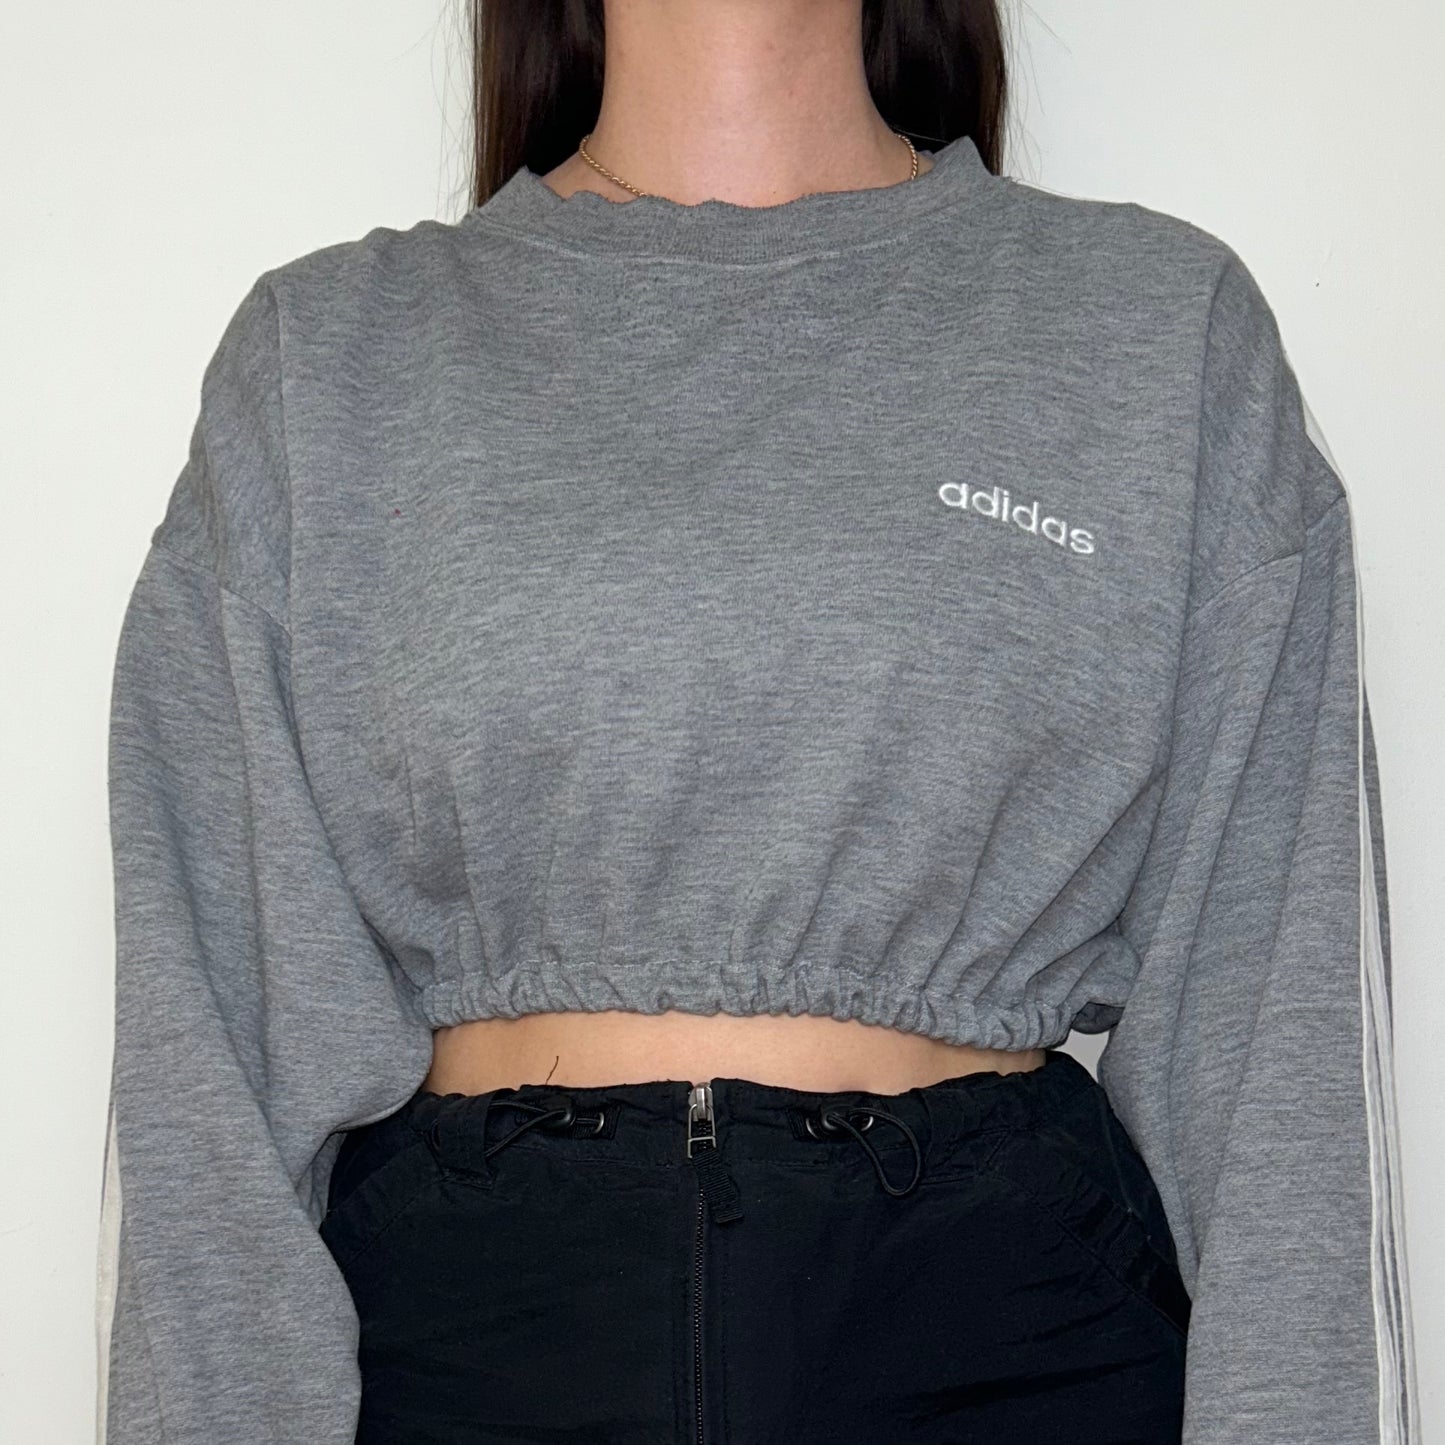 close up of grey cropped sweatshirt with white adidas logo shown on a model